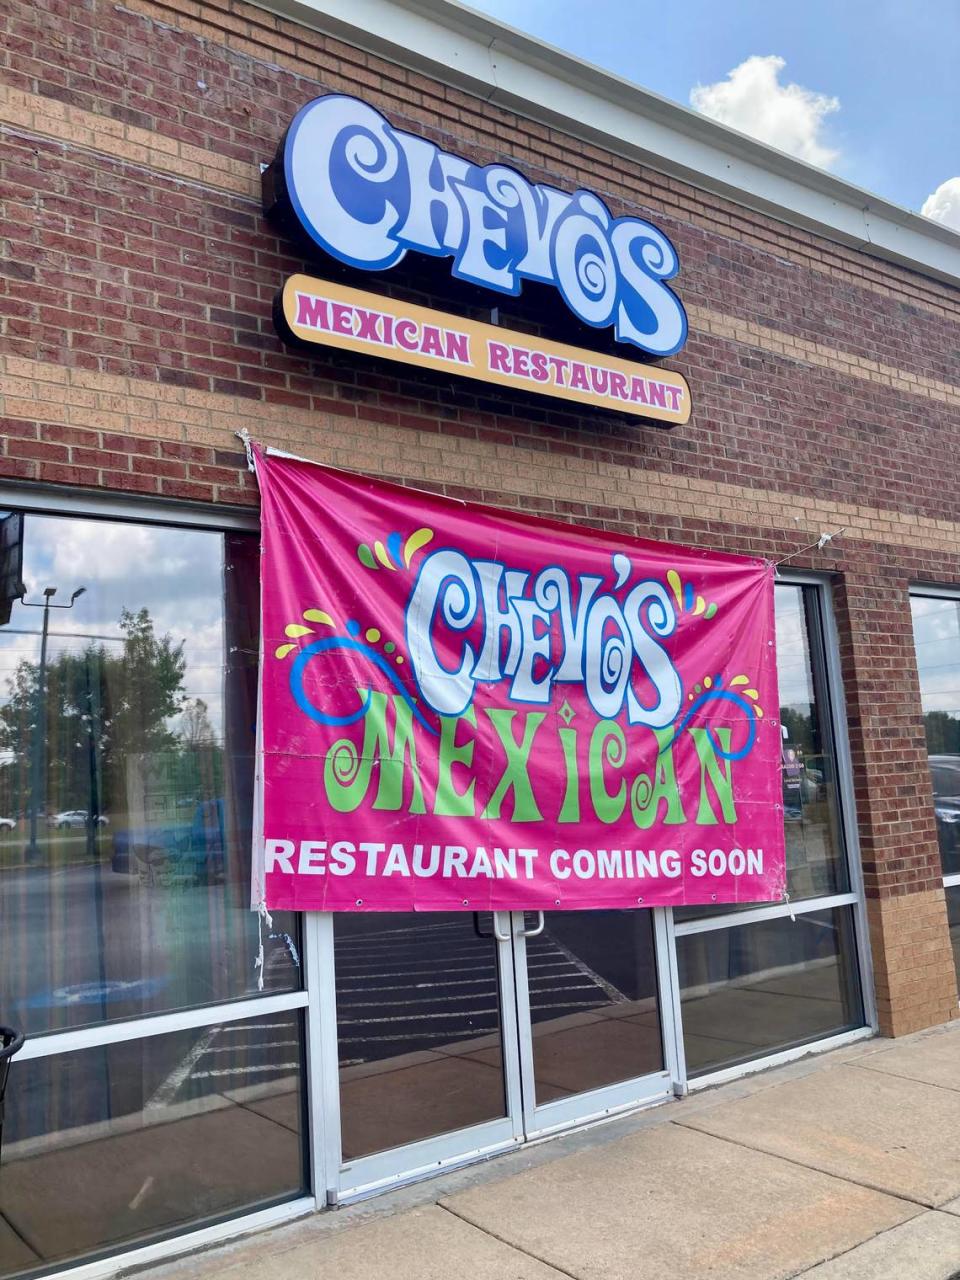 Chevro’s Mexican Restaurant is coming soon to 4921 Suite 2 in Macon.